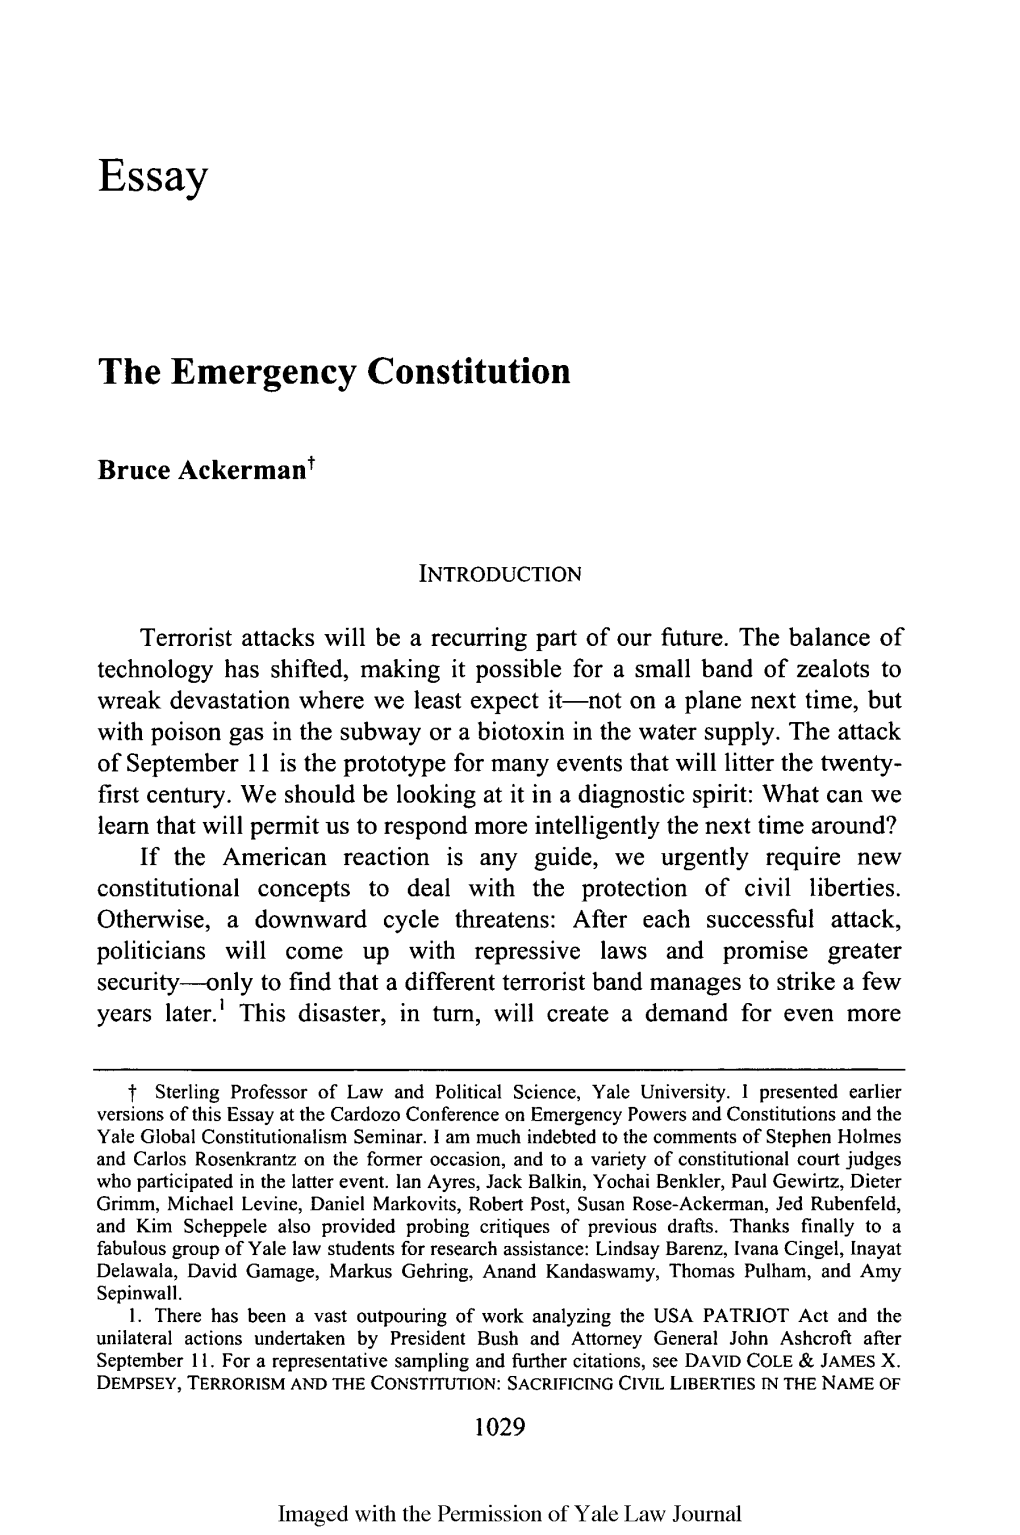 The Emergency Constitution